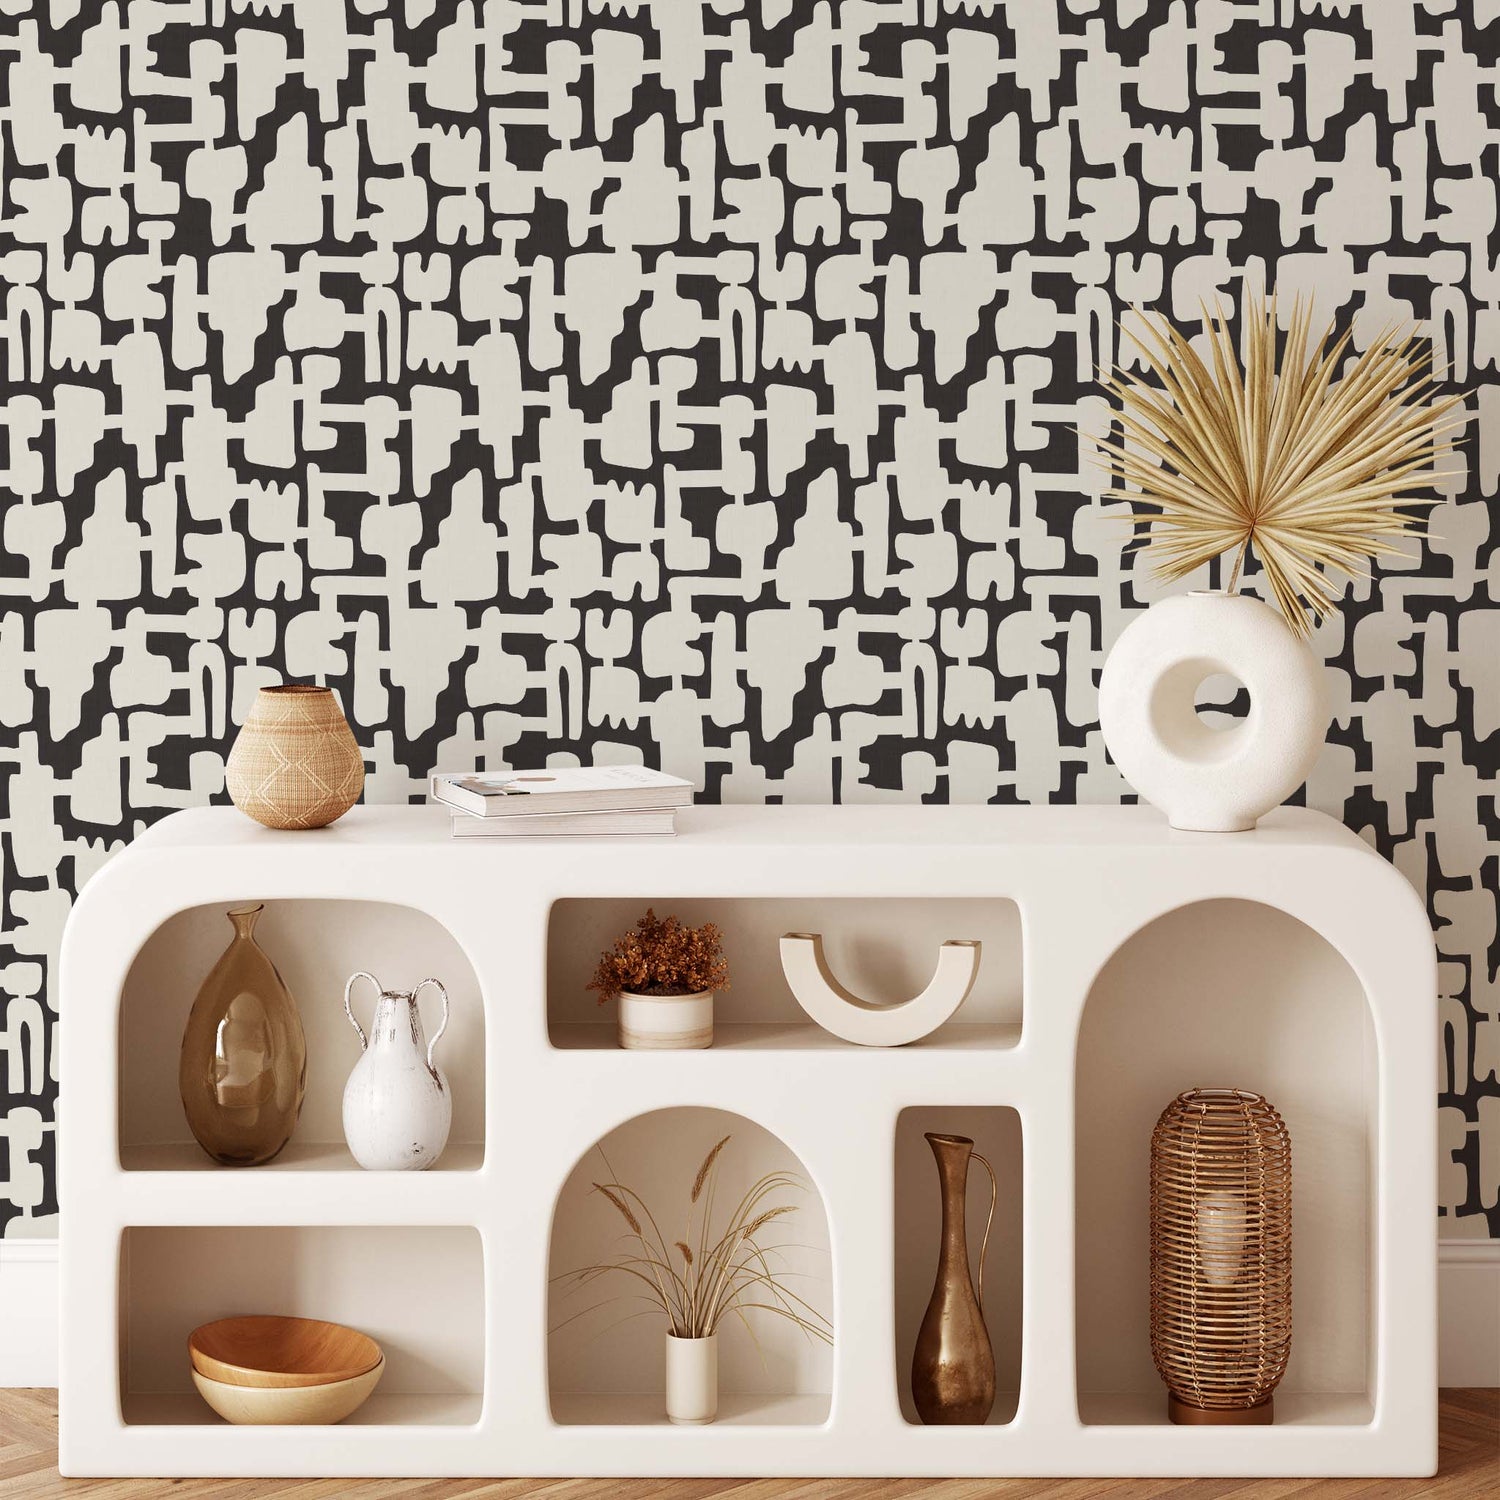 Add some eye-catching style to your walls with our Abstract Shapes Wallpaper! This modern design features an intricate blend of beige shapes on a charcoal background.